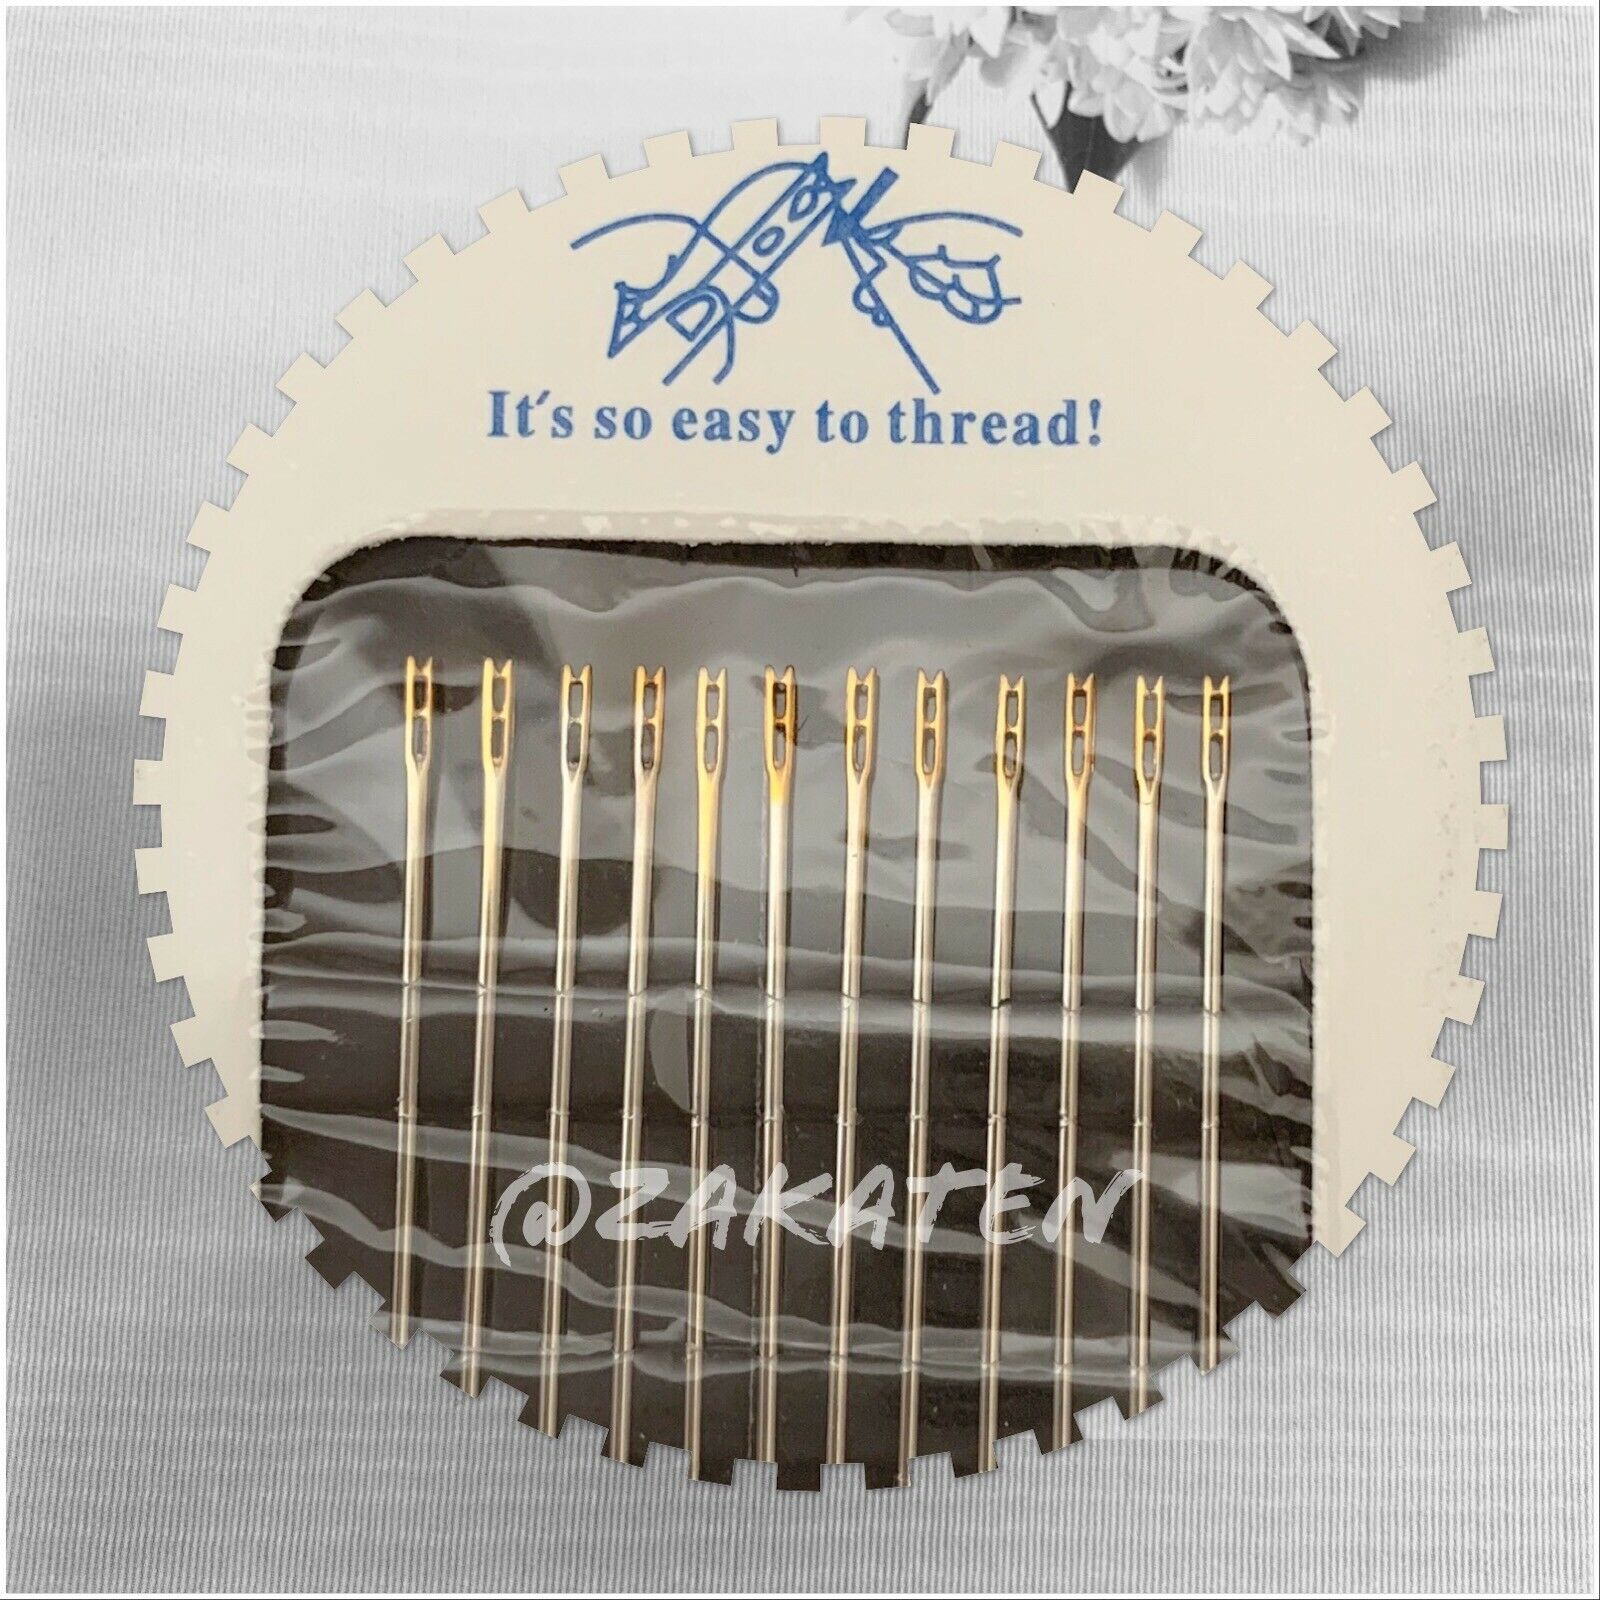 12pcs Assorted Self-threading/easy To Thread Sewing Needles Us Seller